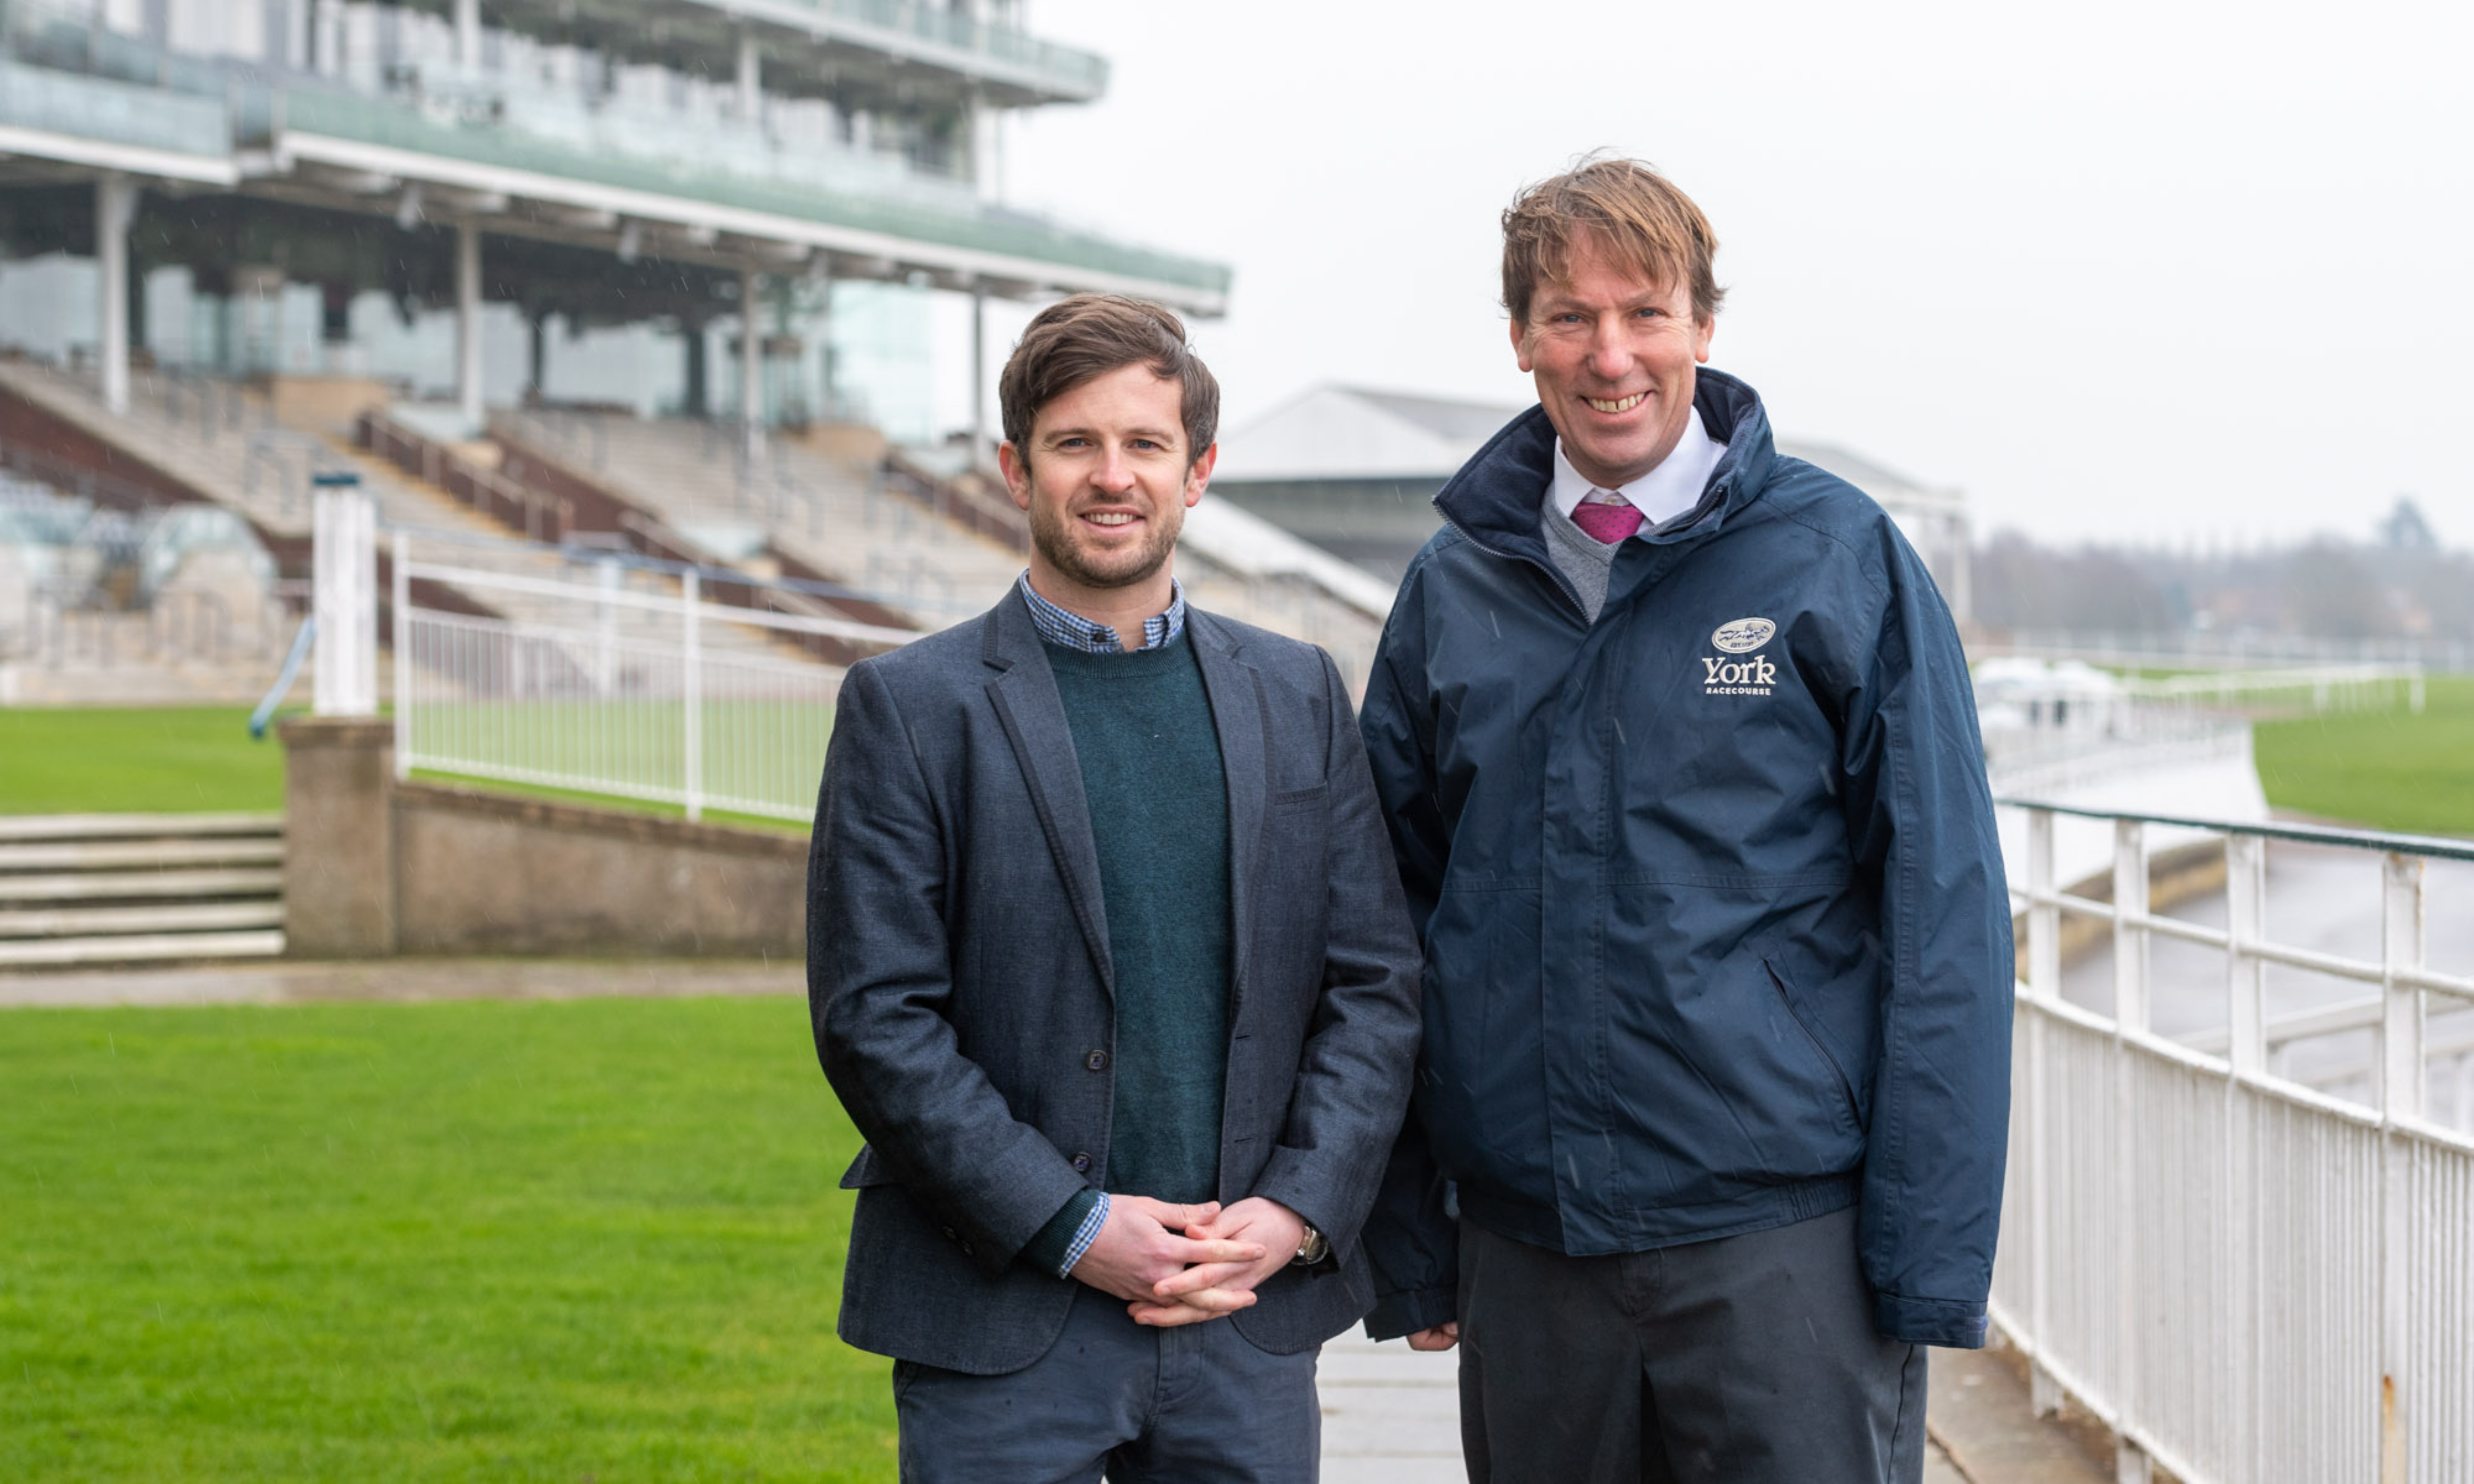 James Duffy, COO at Seat Unique, with William Derby, Chief Executive and Clerk of the Course at York Racecourse